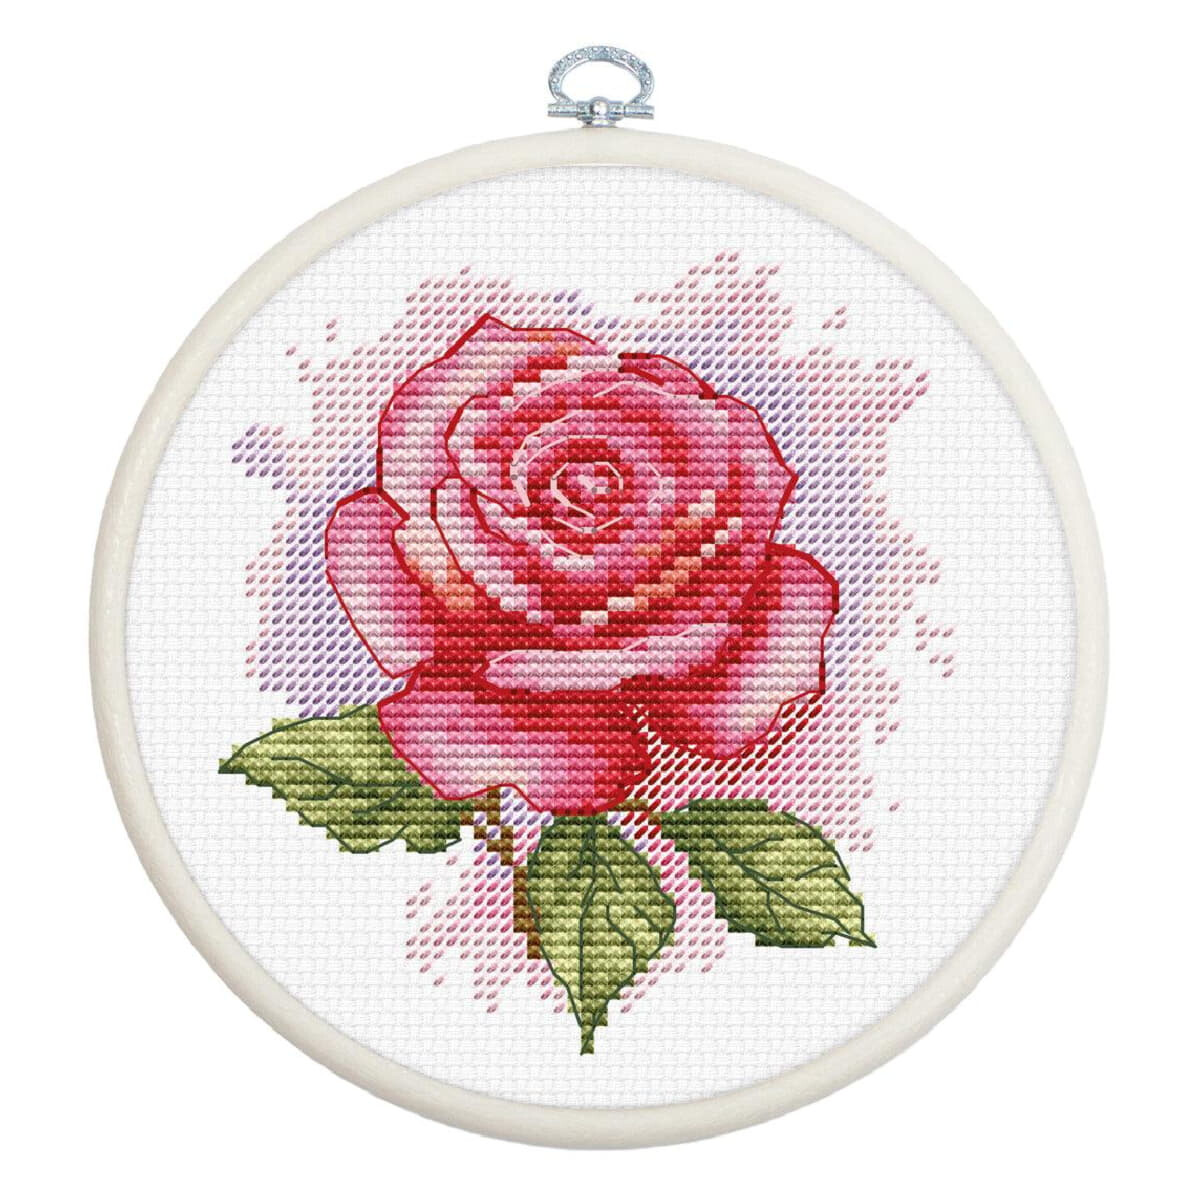 A finished cross-stitch embroidery of a pink rose with...